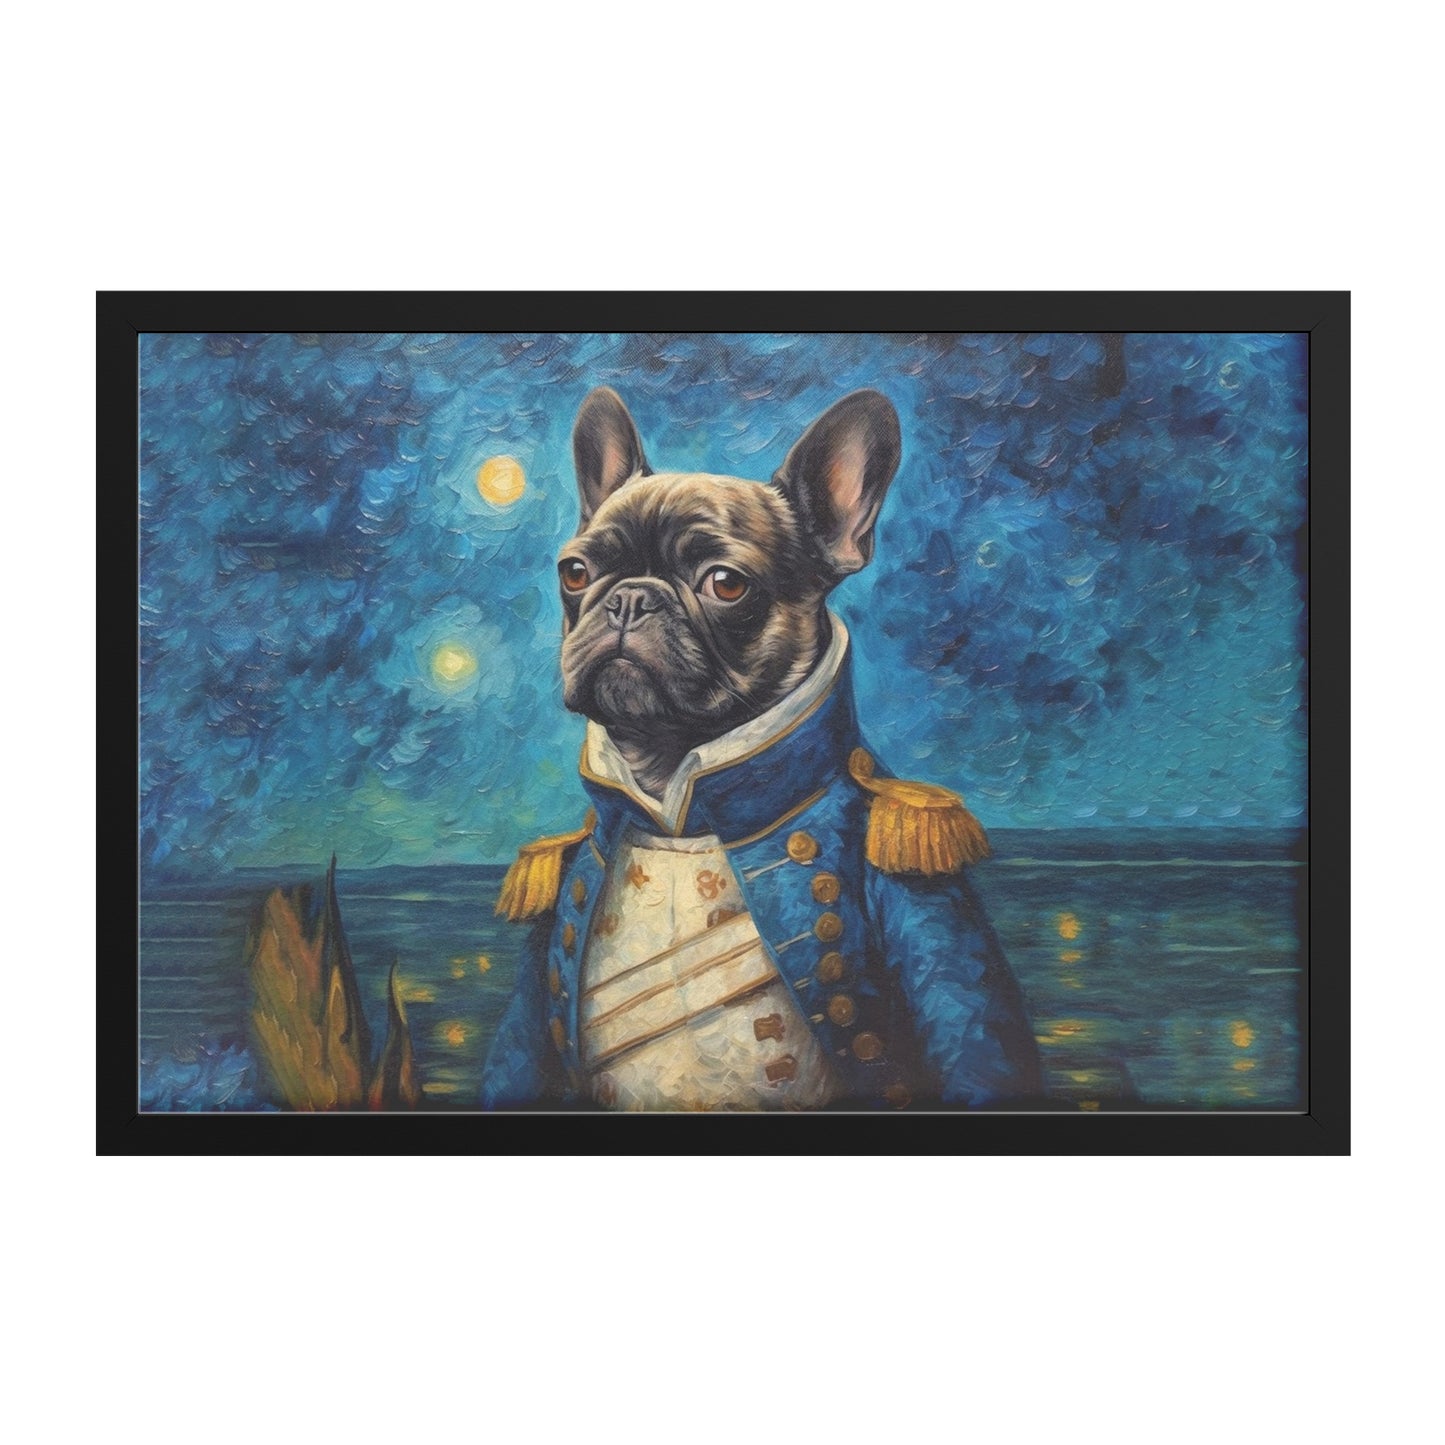 The Starry Night of a Frenchie